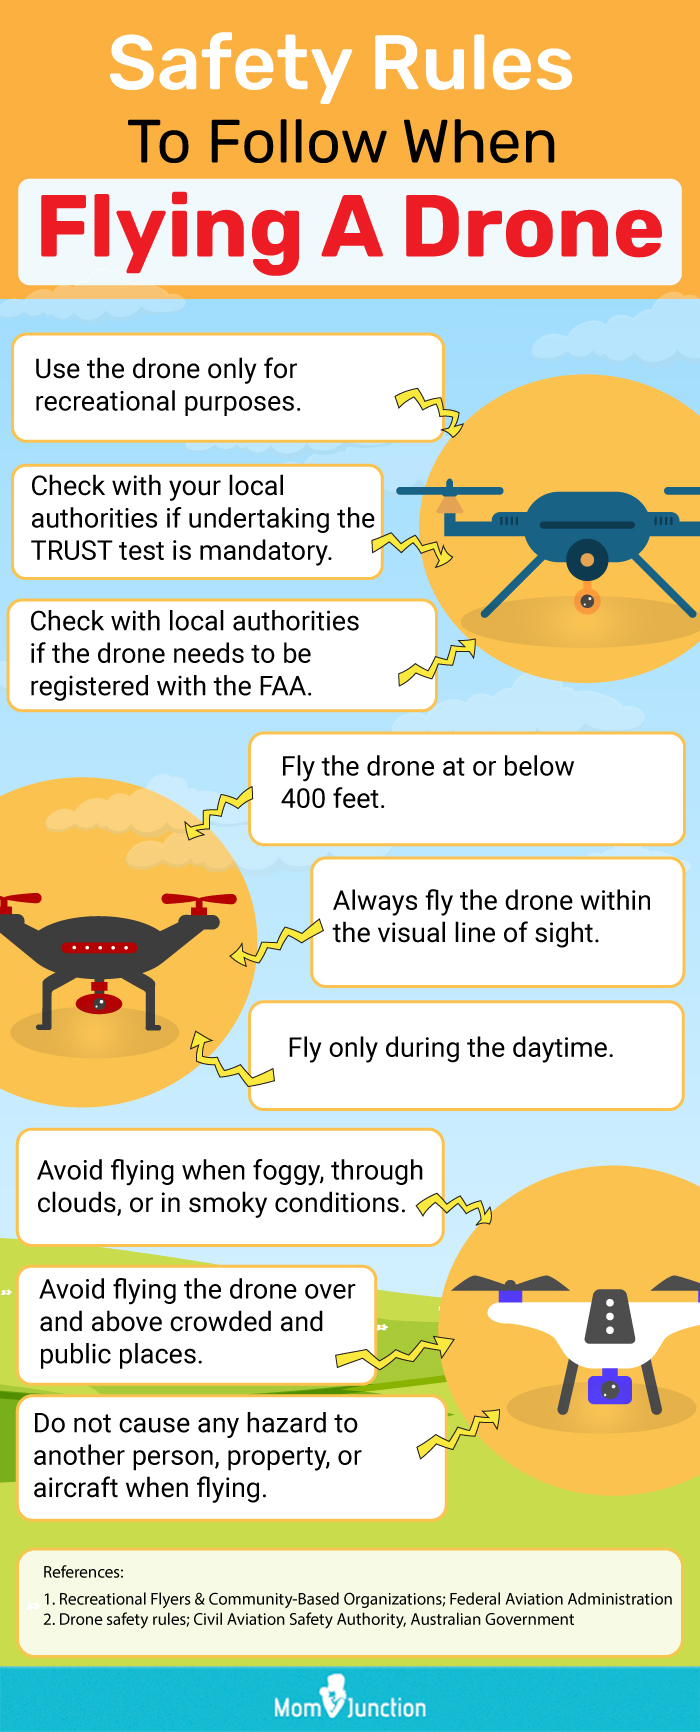 Safety Rules To Follow When Flying A Drone (Infographic)